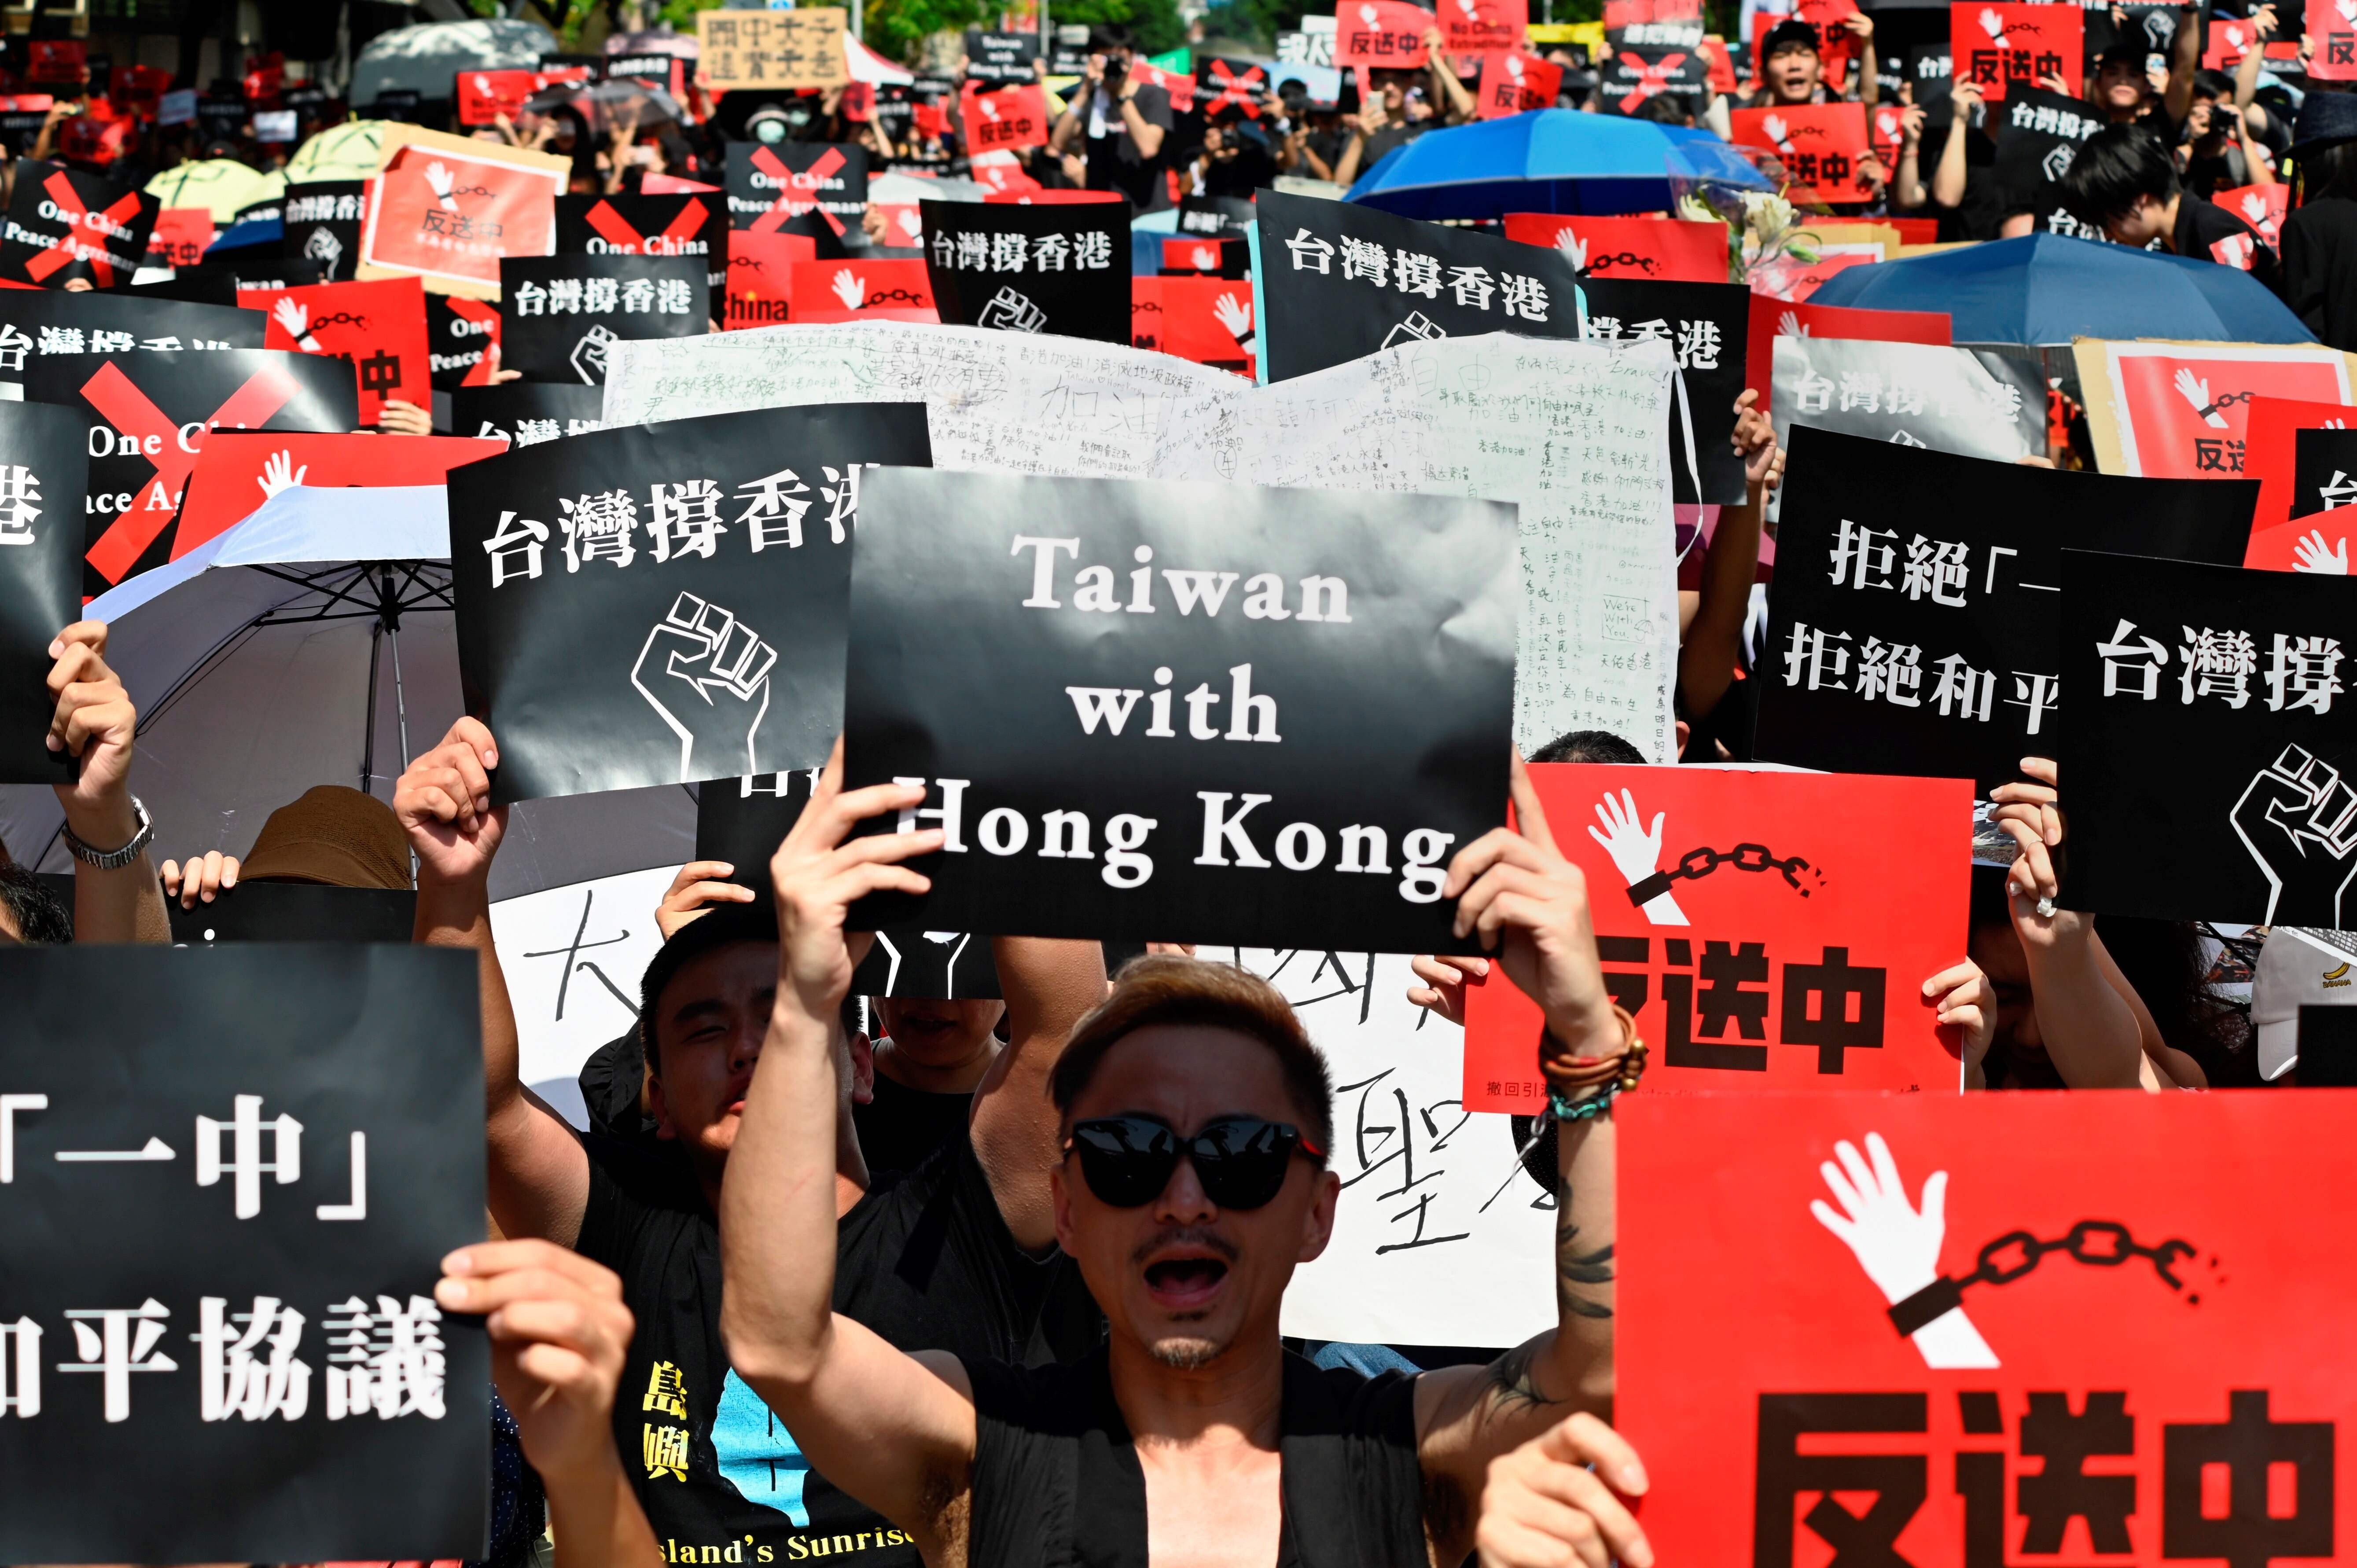 Protesters at a demonstration in Taipei display placards in support of the anti-government protests taking place in Hong Kong. Photo: AFP